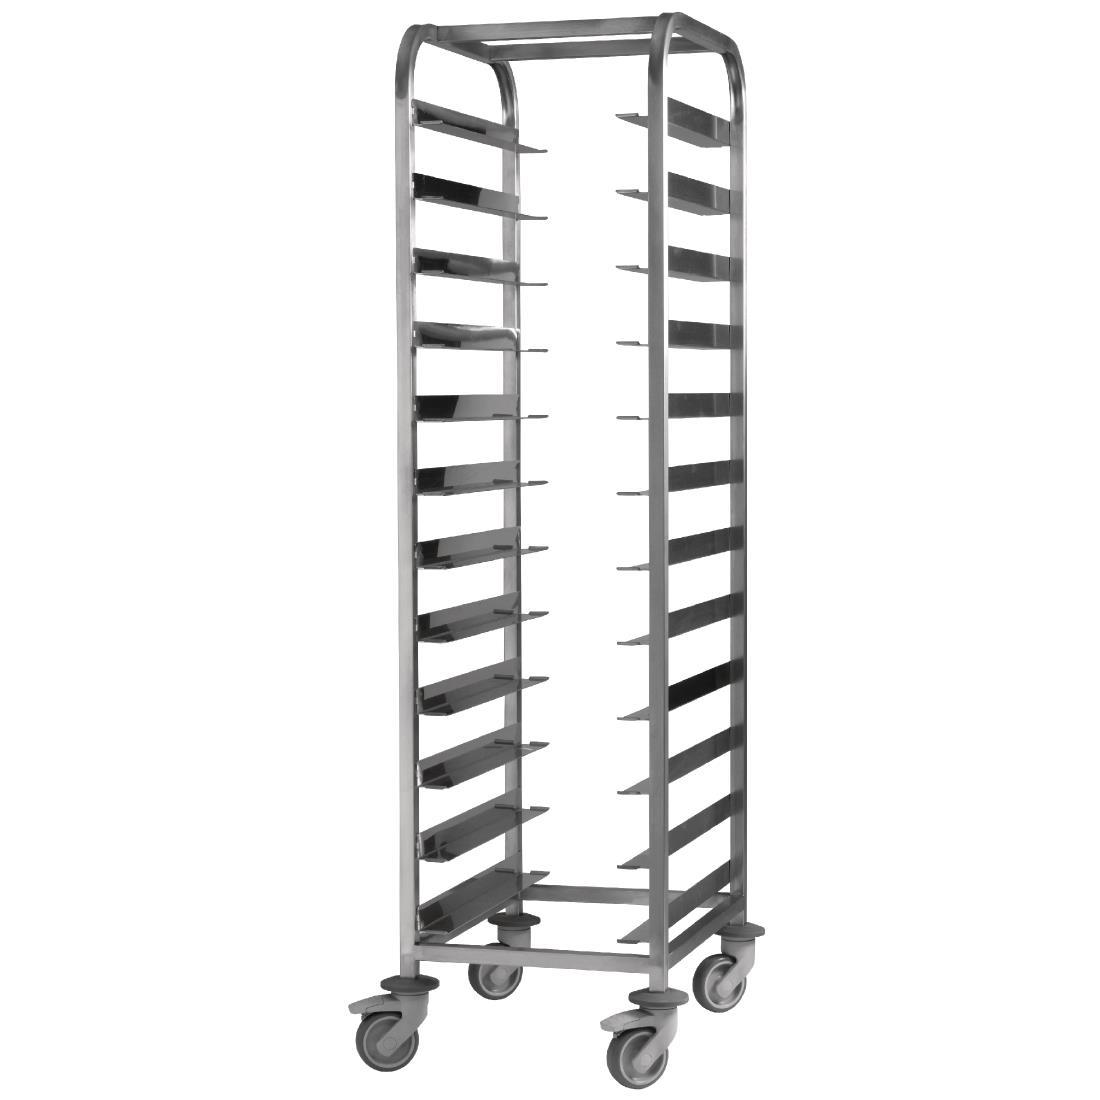 EAIS Stainless Steel Clearing Trolley 12 Shelves - DP292  - 1